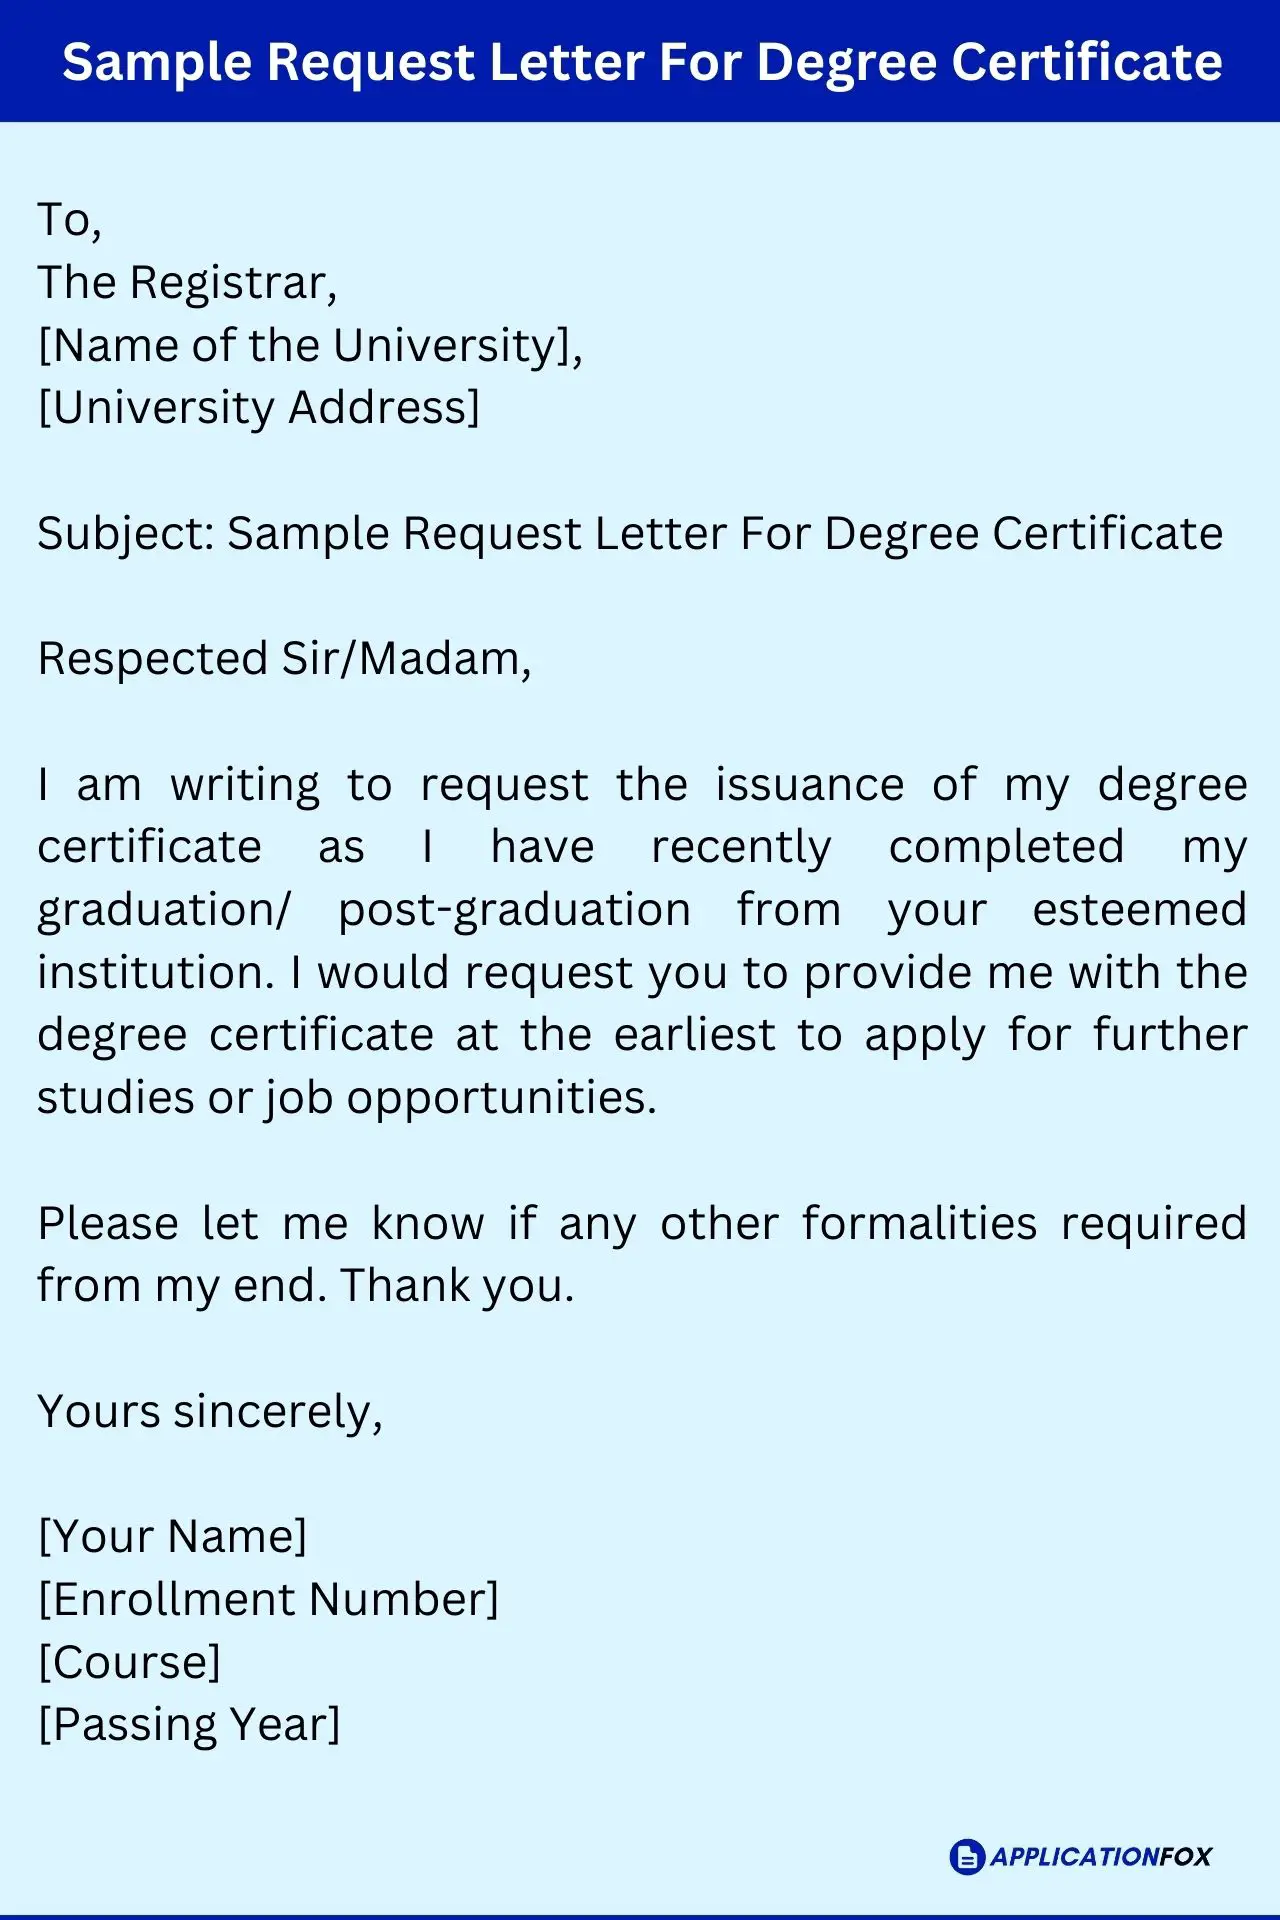 how to write an application letter for your certificate